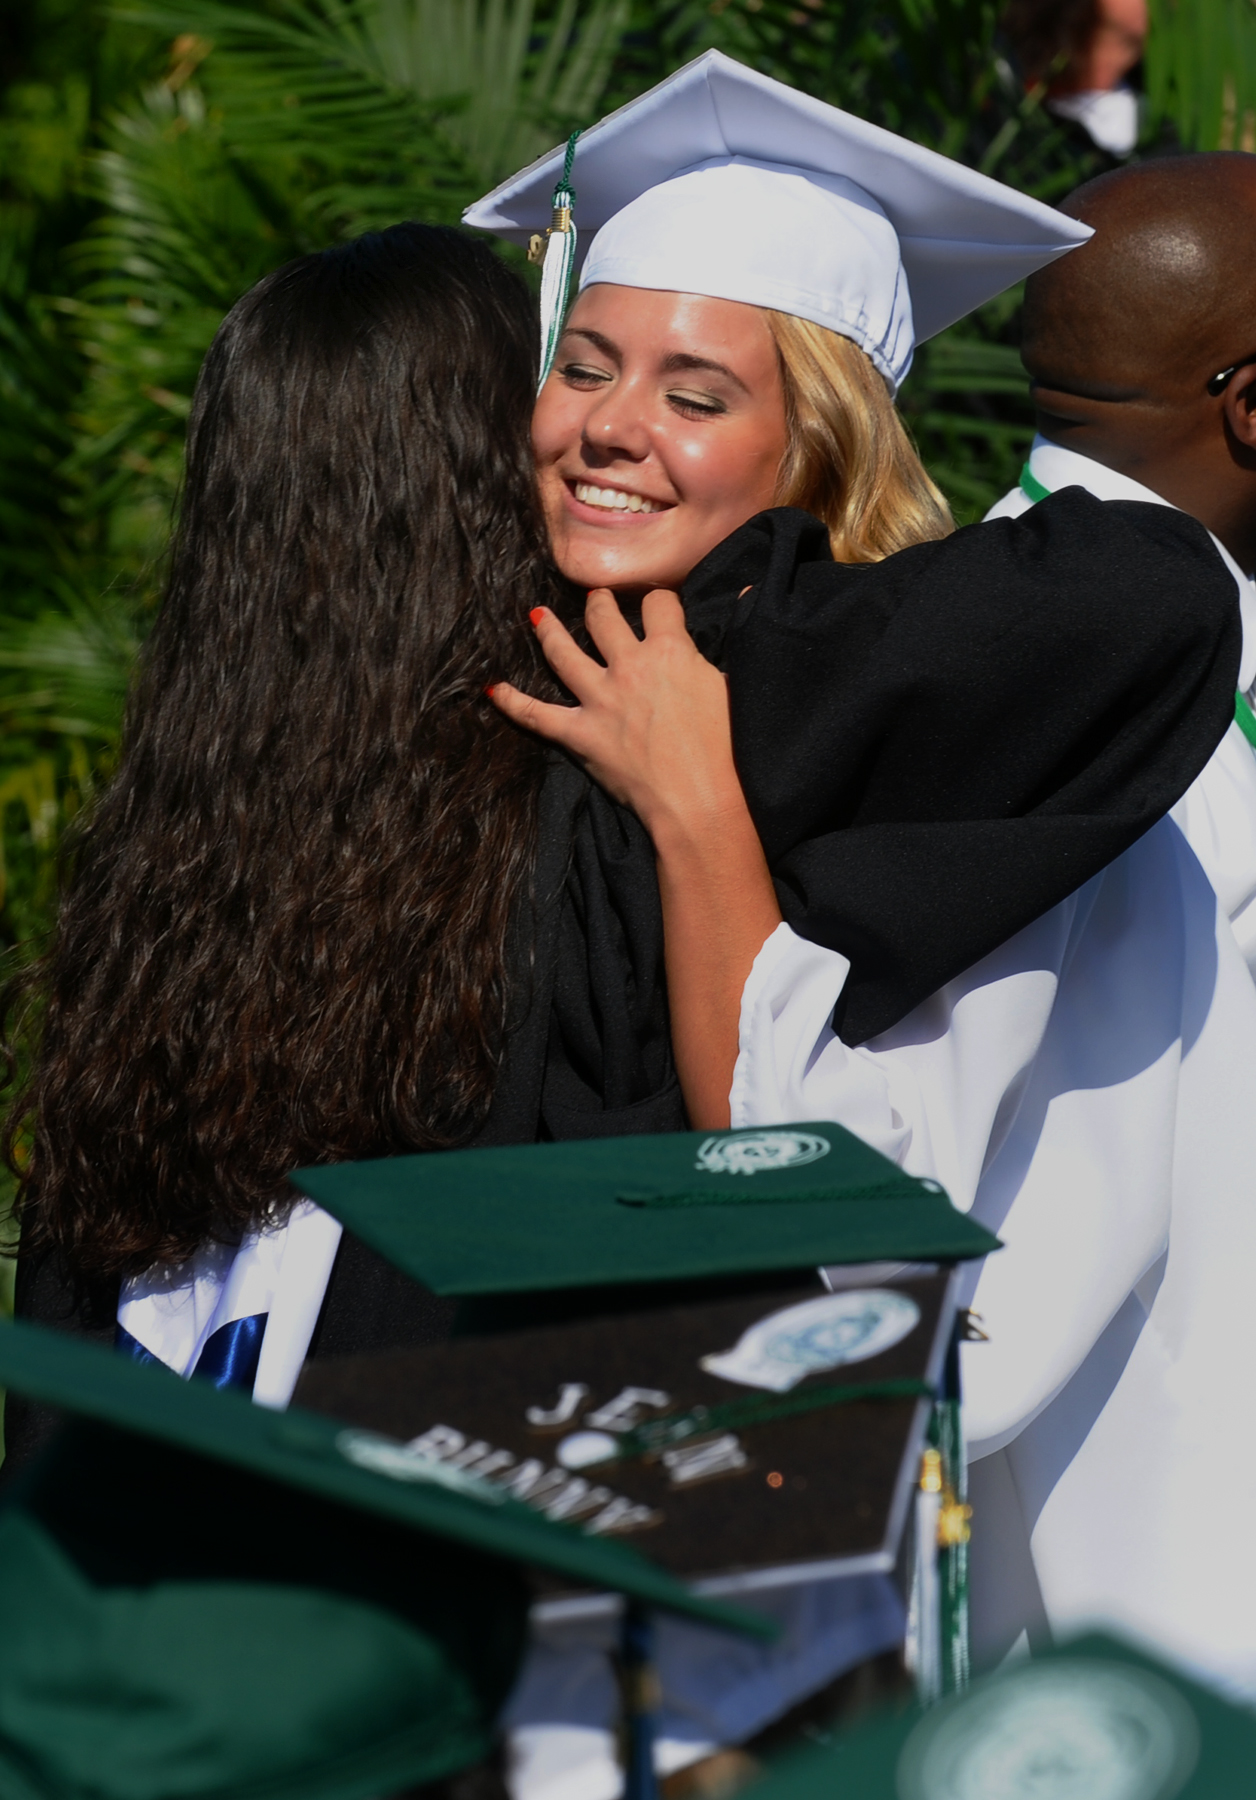 Mecca bids farewell to Class of 2012 and NHS - StamfordAdvocate